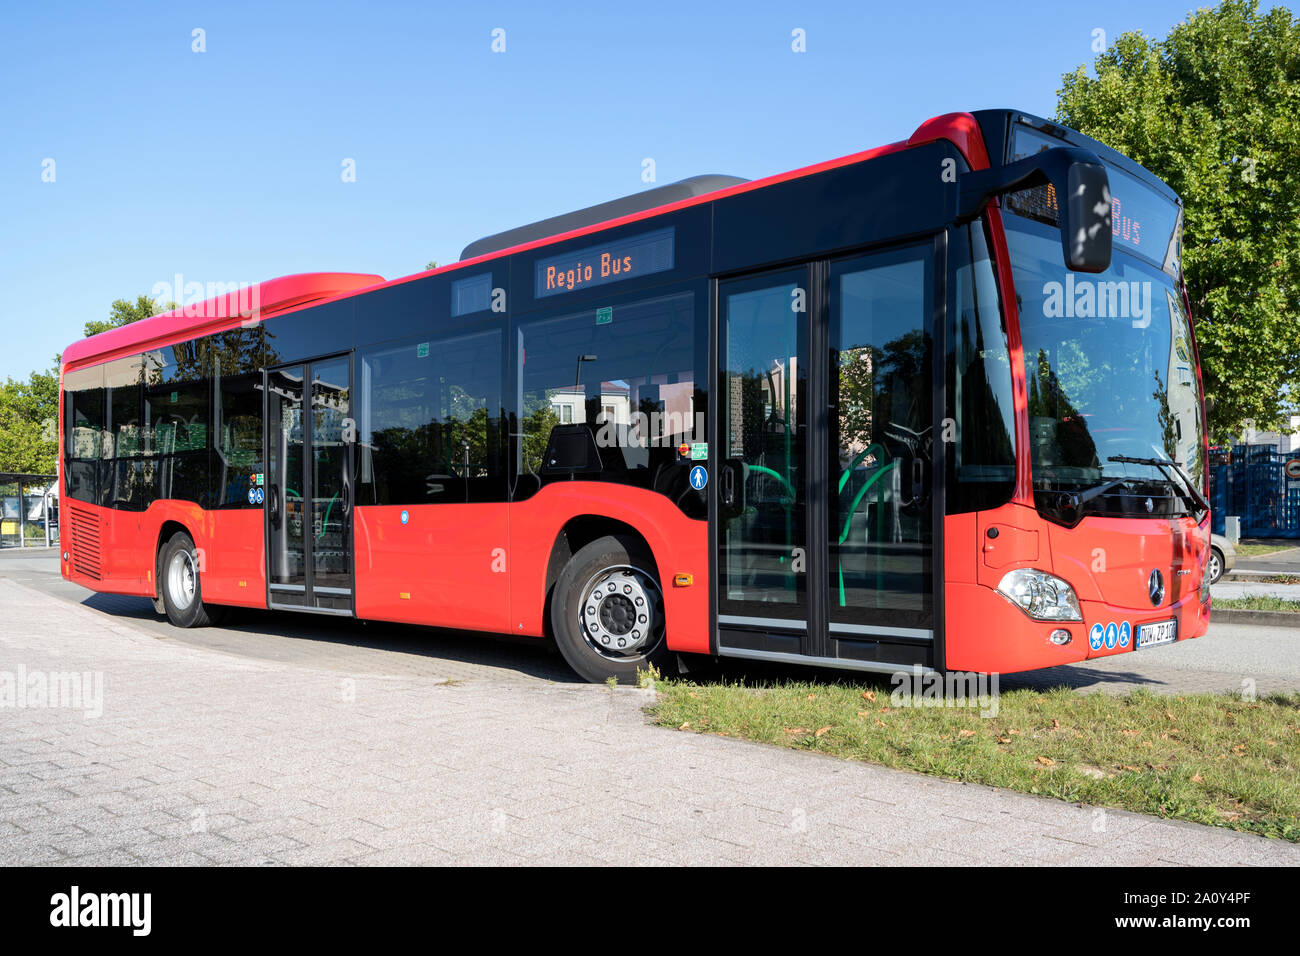 DB Regio Mercedes-Benz Citaro bus. DB Regio Bus is a subsidiary of Deutsche Bahn and one of the largest providers of German bus transport. Stock Photo